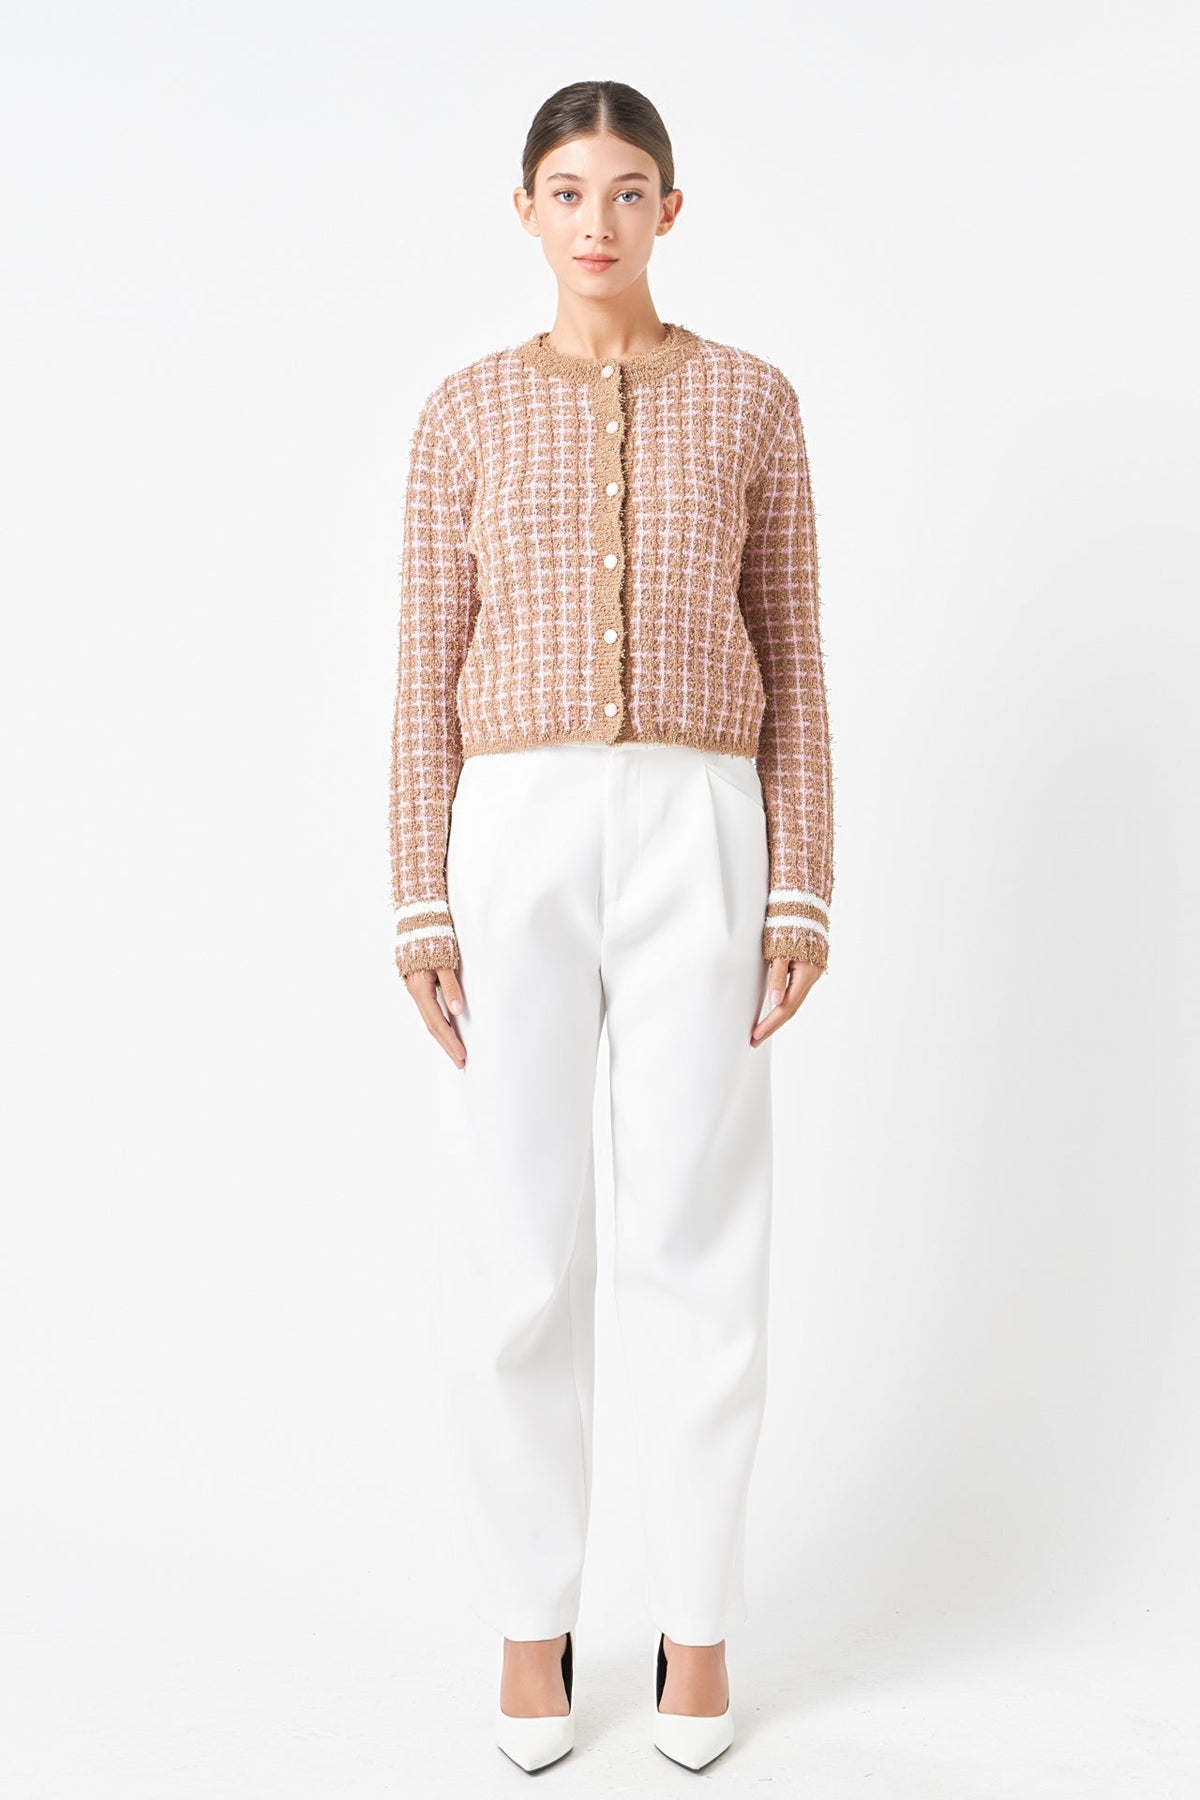 ENDLESS ROSE - Check Sweater Cardigan - SWEATERS & KNITS available at Objectrare